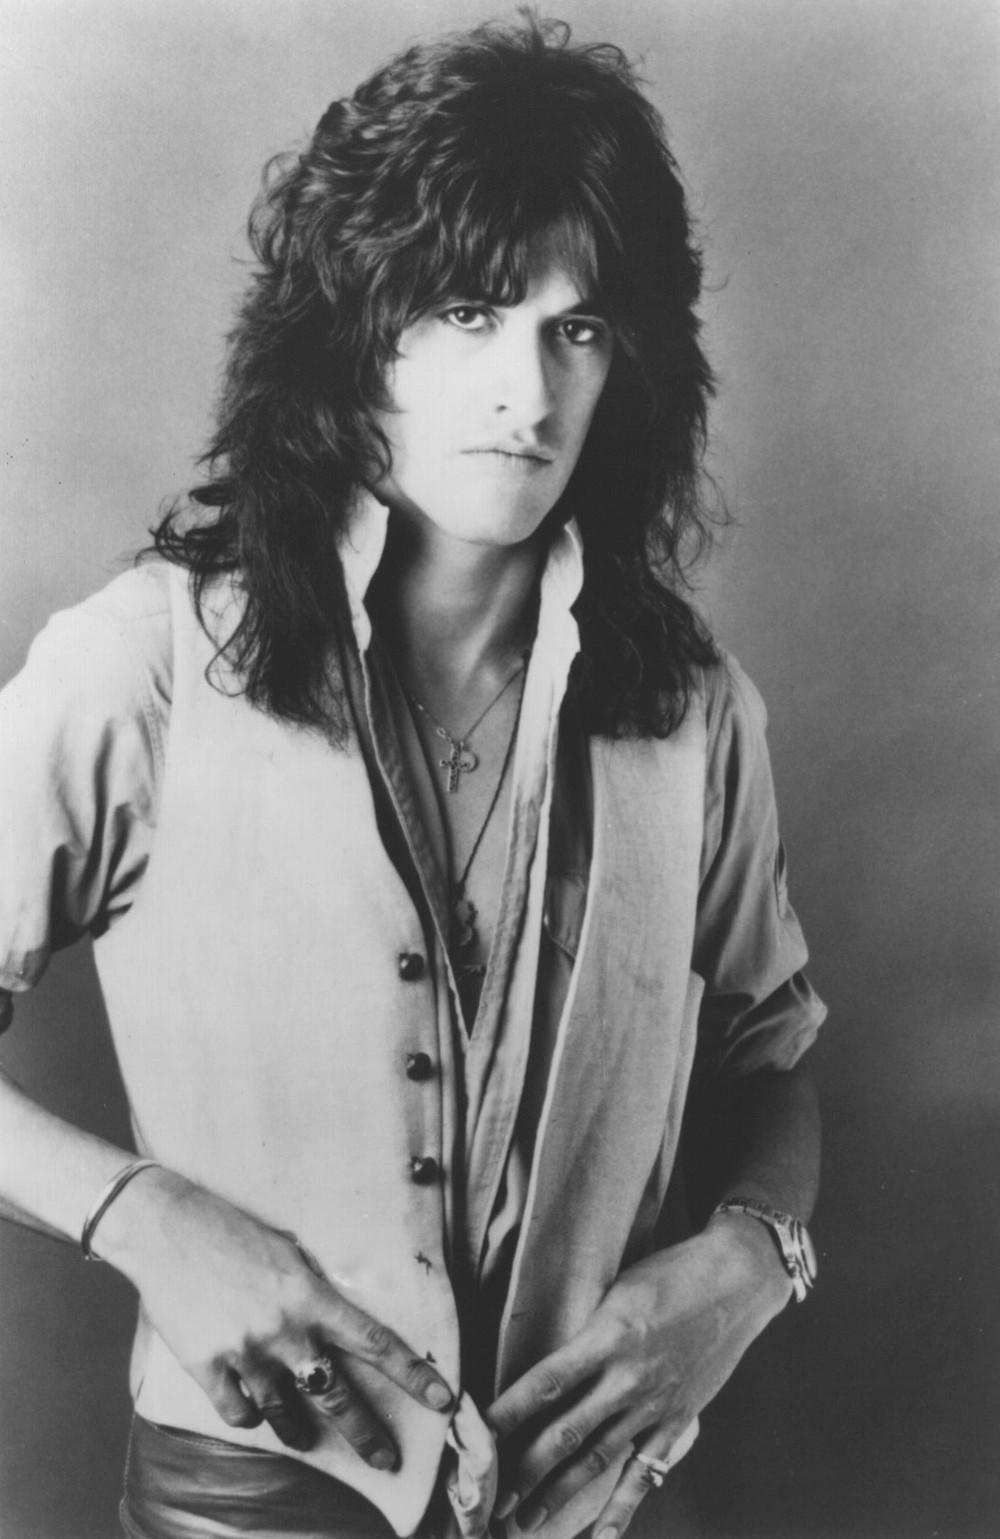 Happy 70th Birthday to Joe Perry of Aerosmith, born this day in Lawrence, MA. 